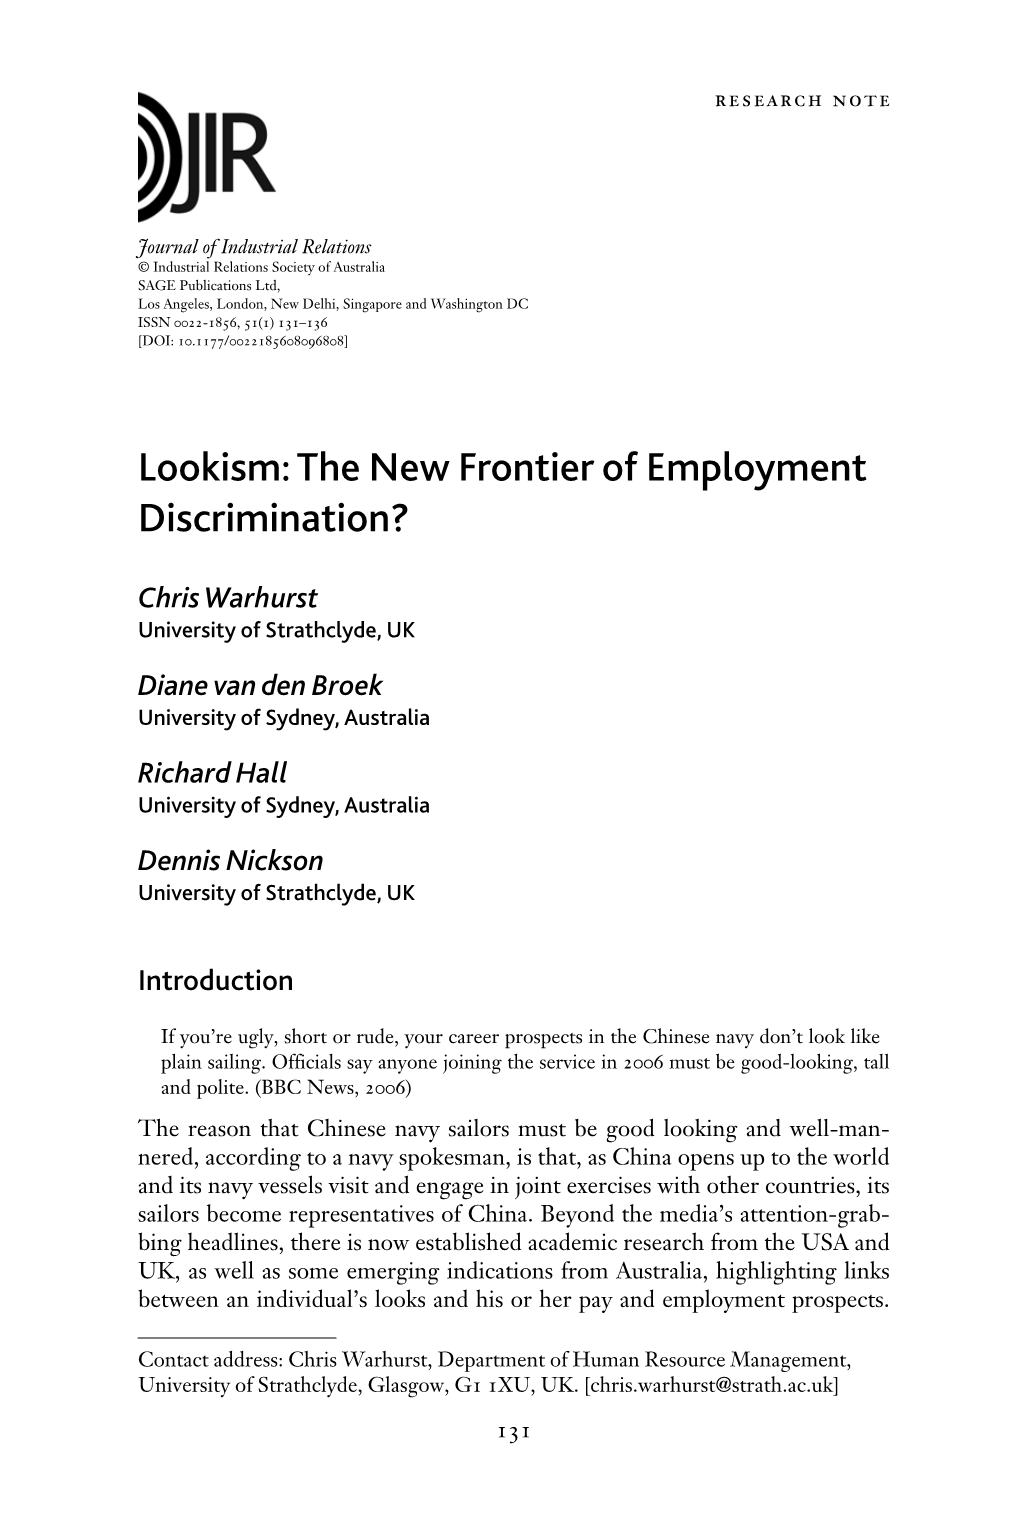 Lookism: the New Frontier of Employment Discrimination?